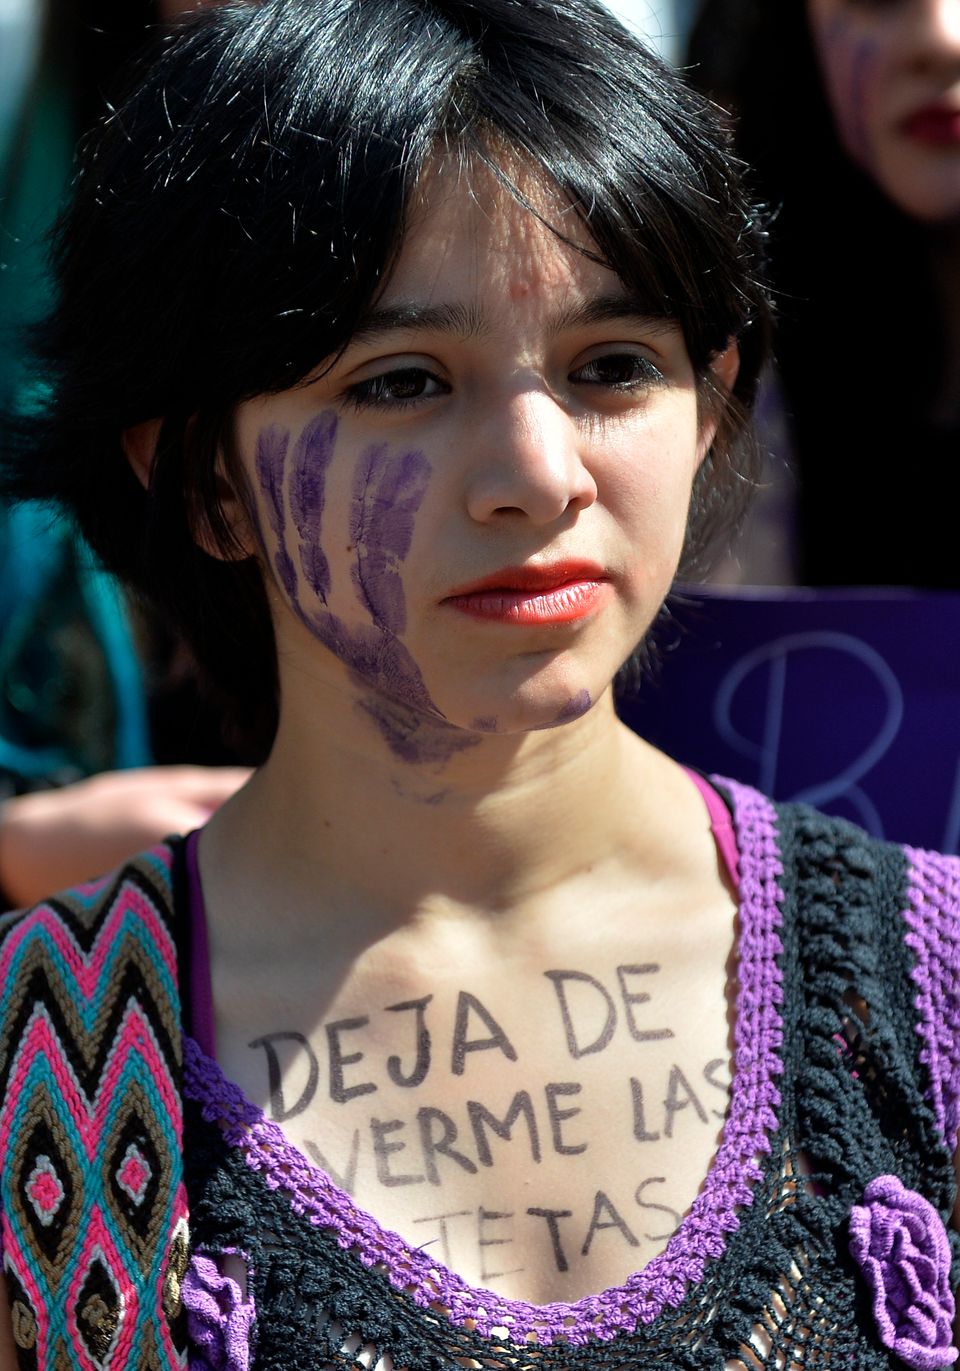 27 Powerful Images Of Women Protesting Against Femicide In Latin